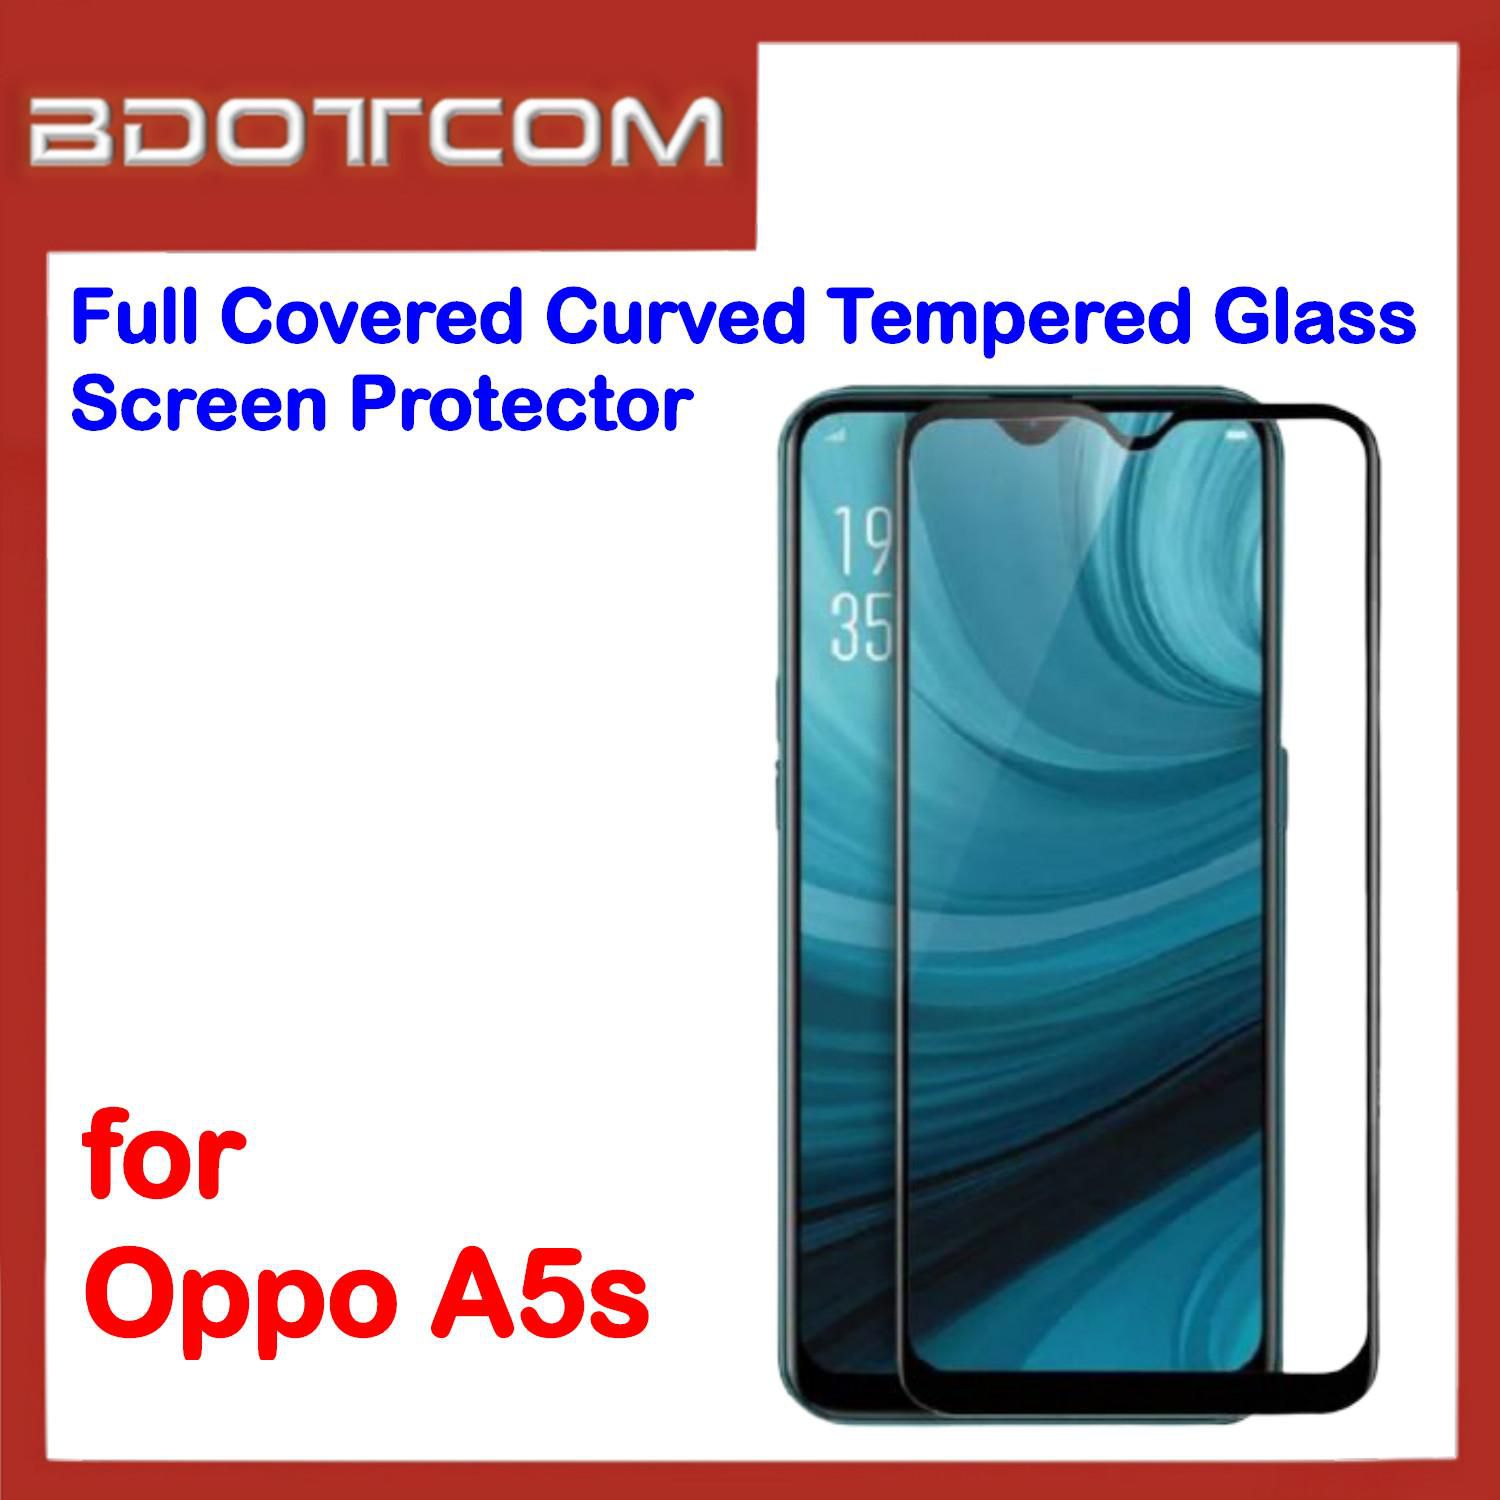 Bdotcom Full Covered Curved Tempered Glass Screen Protector for Oppo A5s (Black)